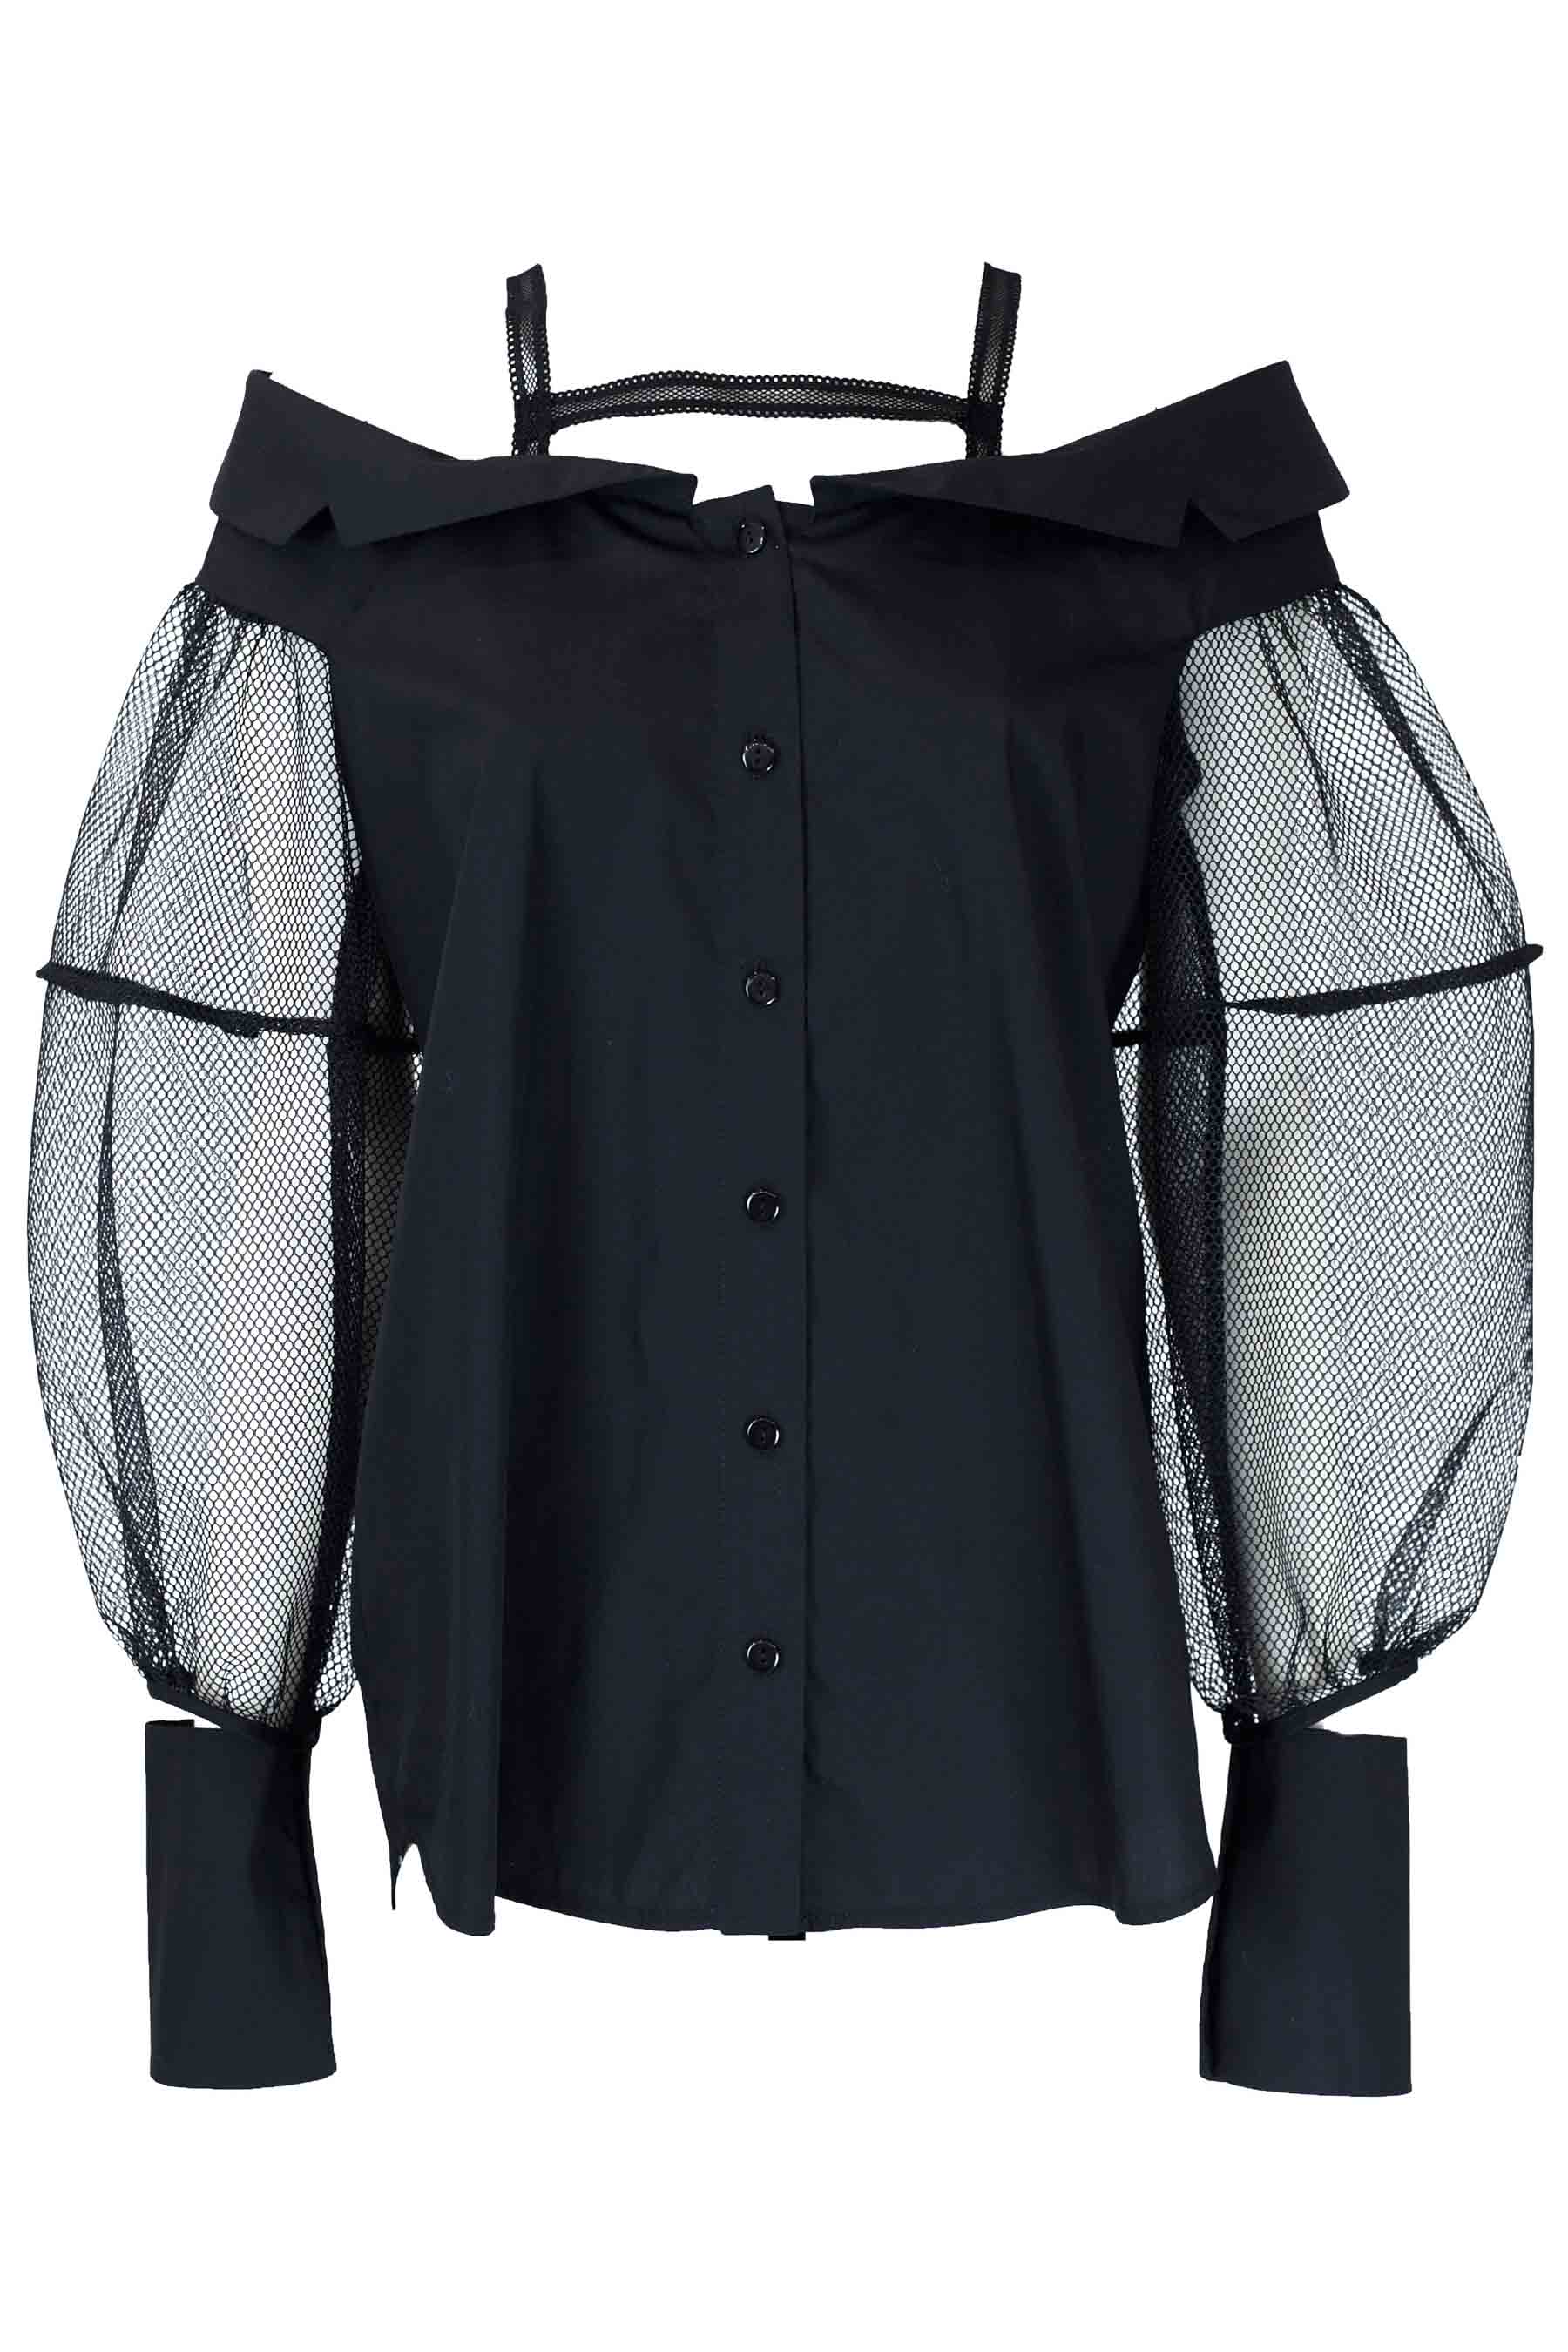 Blouse without shoulders black mesh sleeve